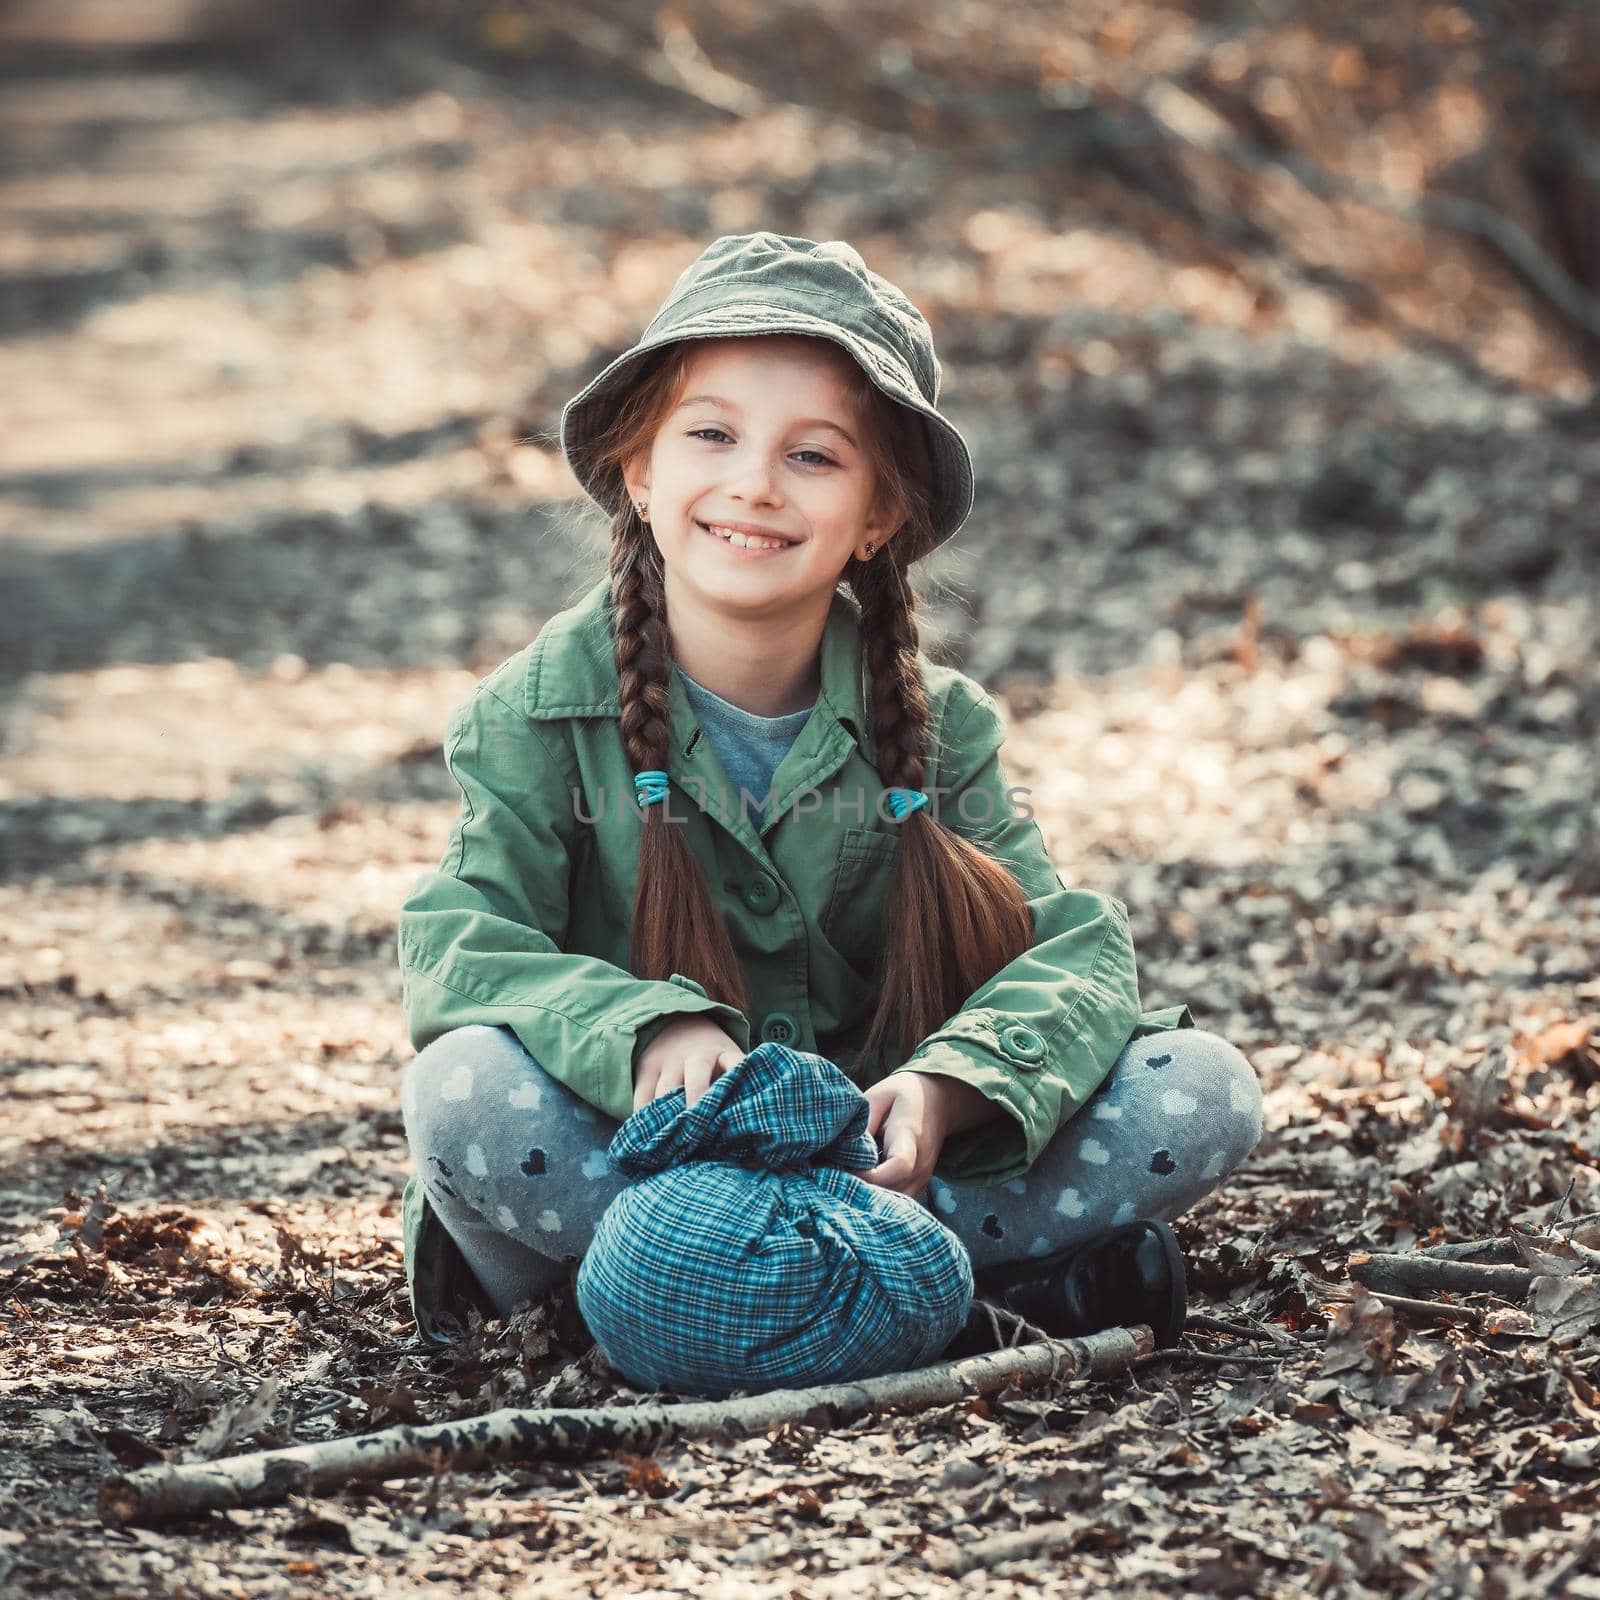 little girl playing in the woods, photo in vintage style